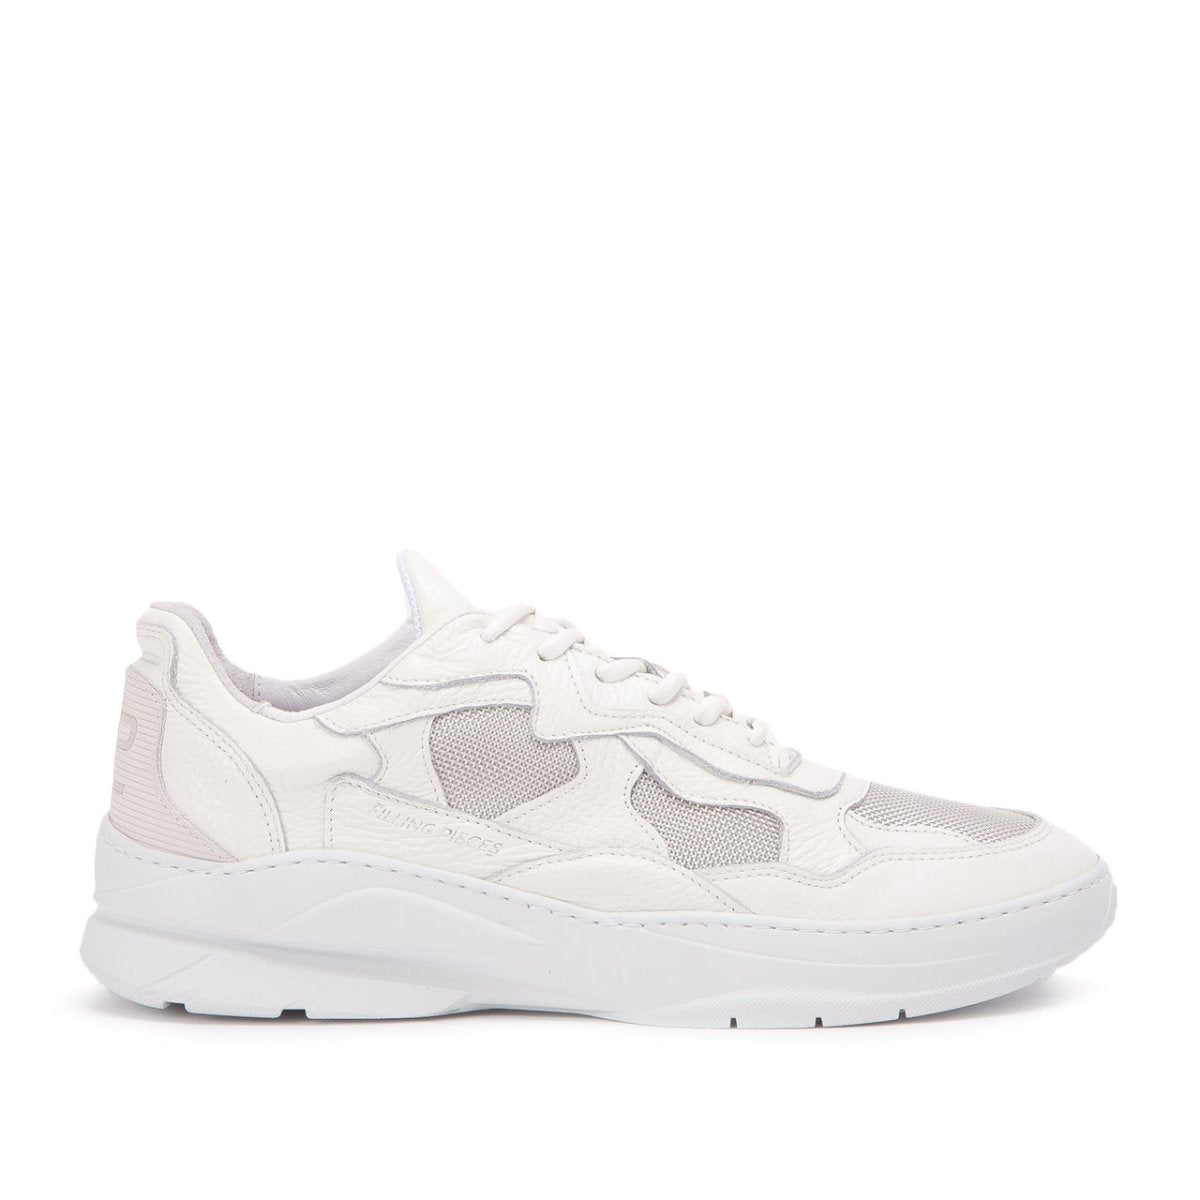 tom modnes Poesi Filling Pieces Low Fade Cosmo Mix (White) 0292507 – Allike Store